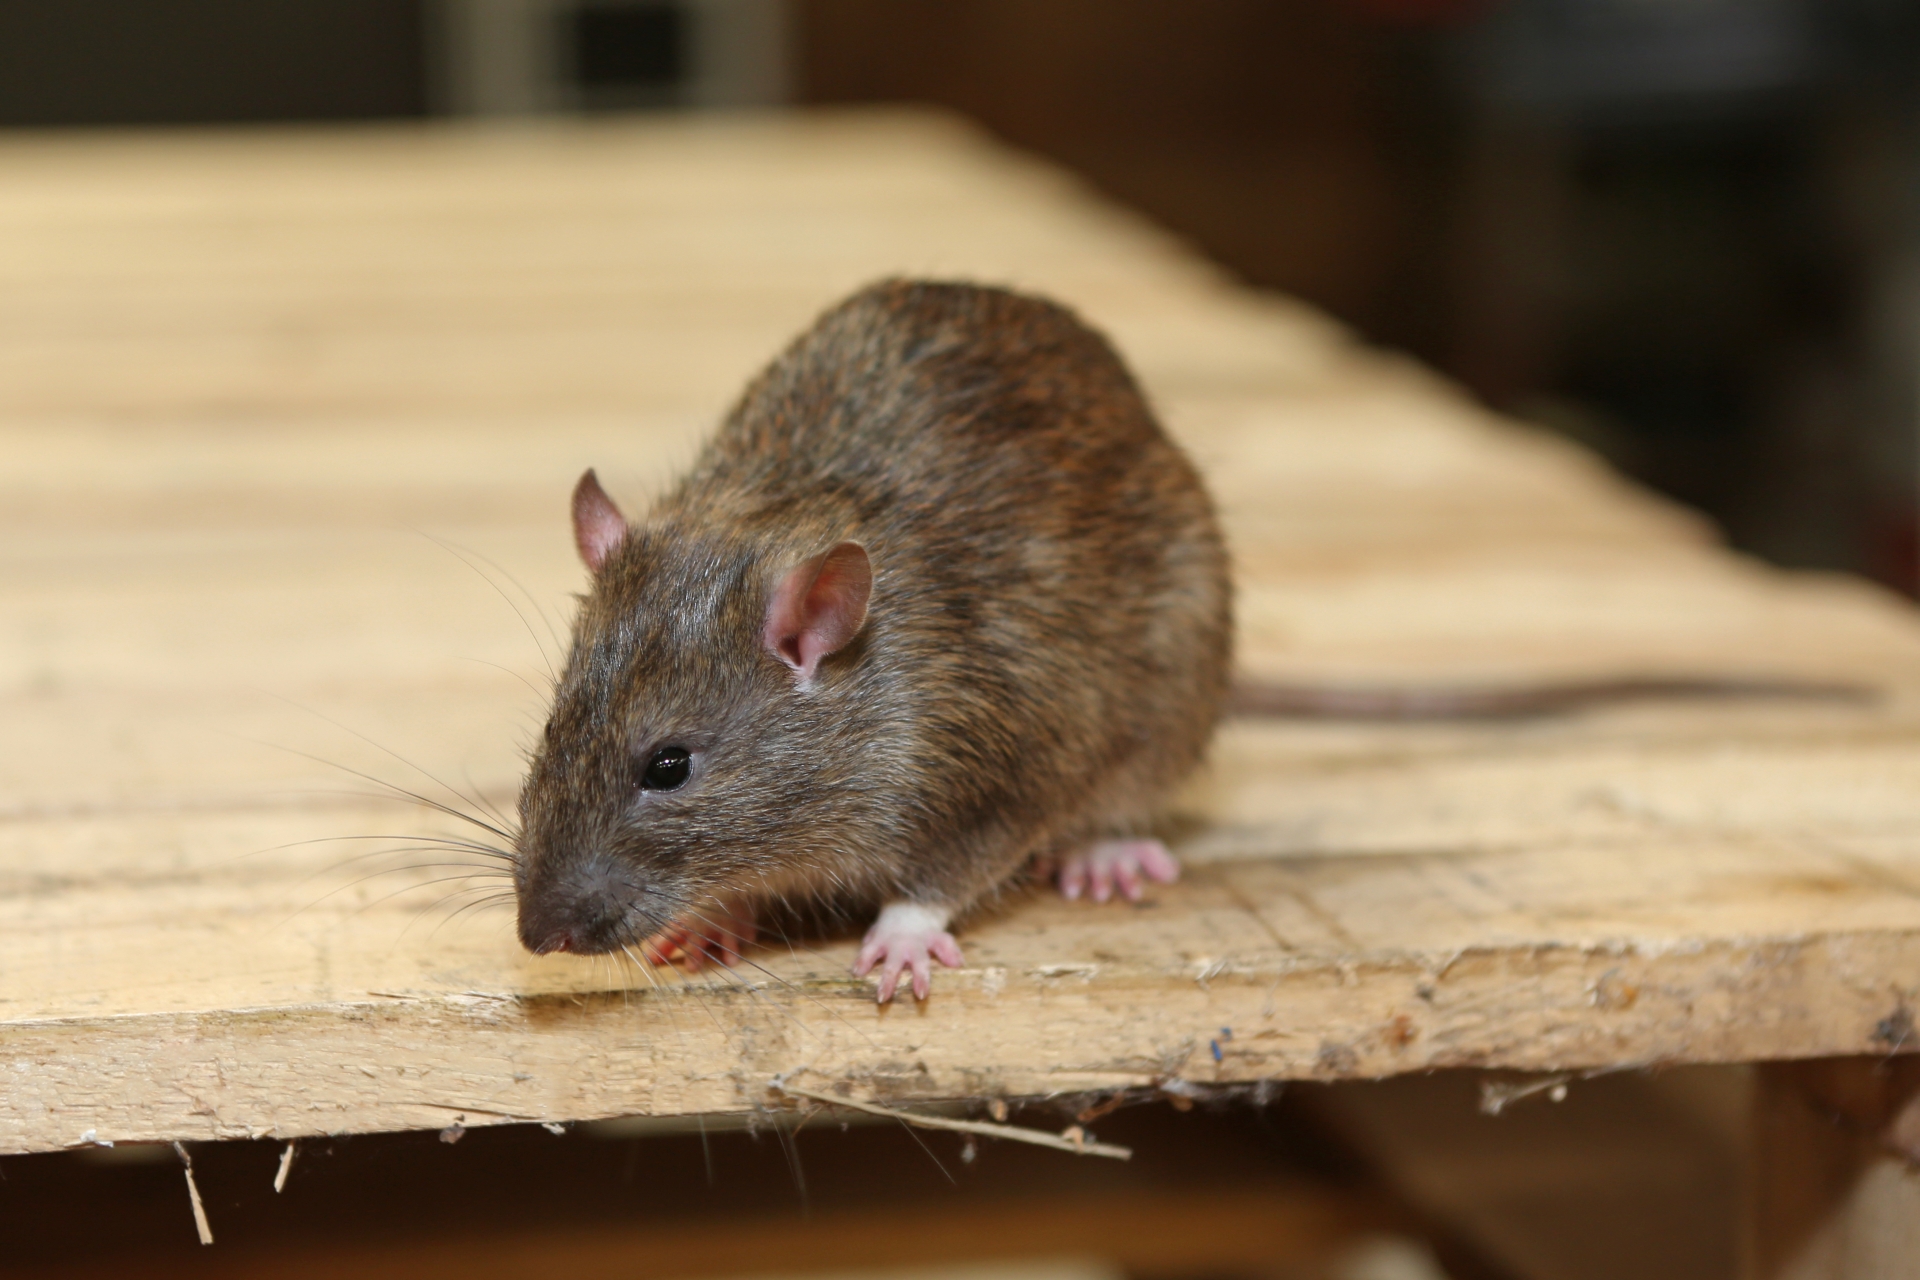 Rat Control, Pest Control in Herne Hill, SE24. Call Now 020 8166 9746